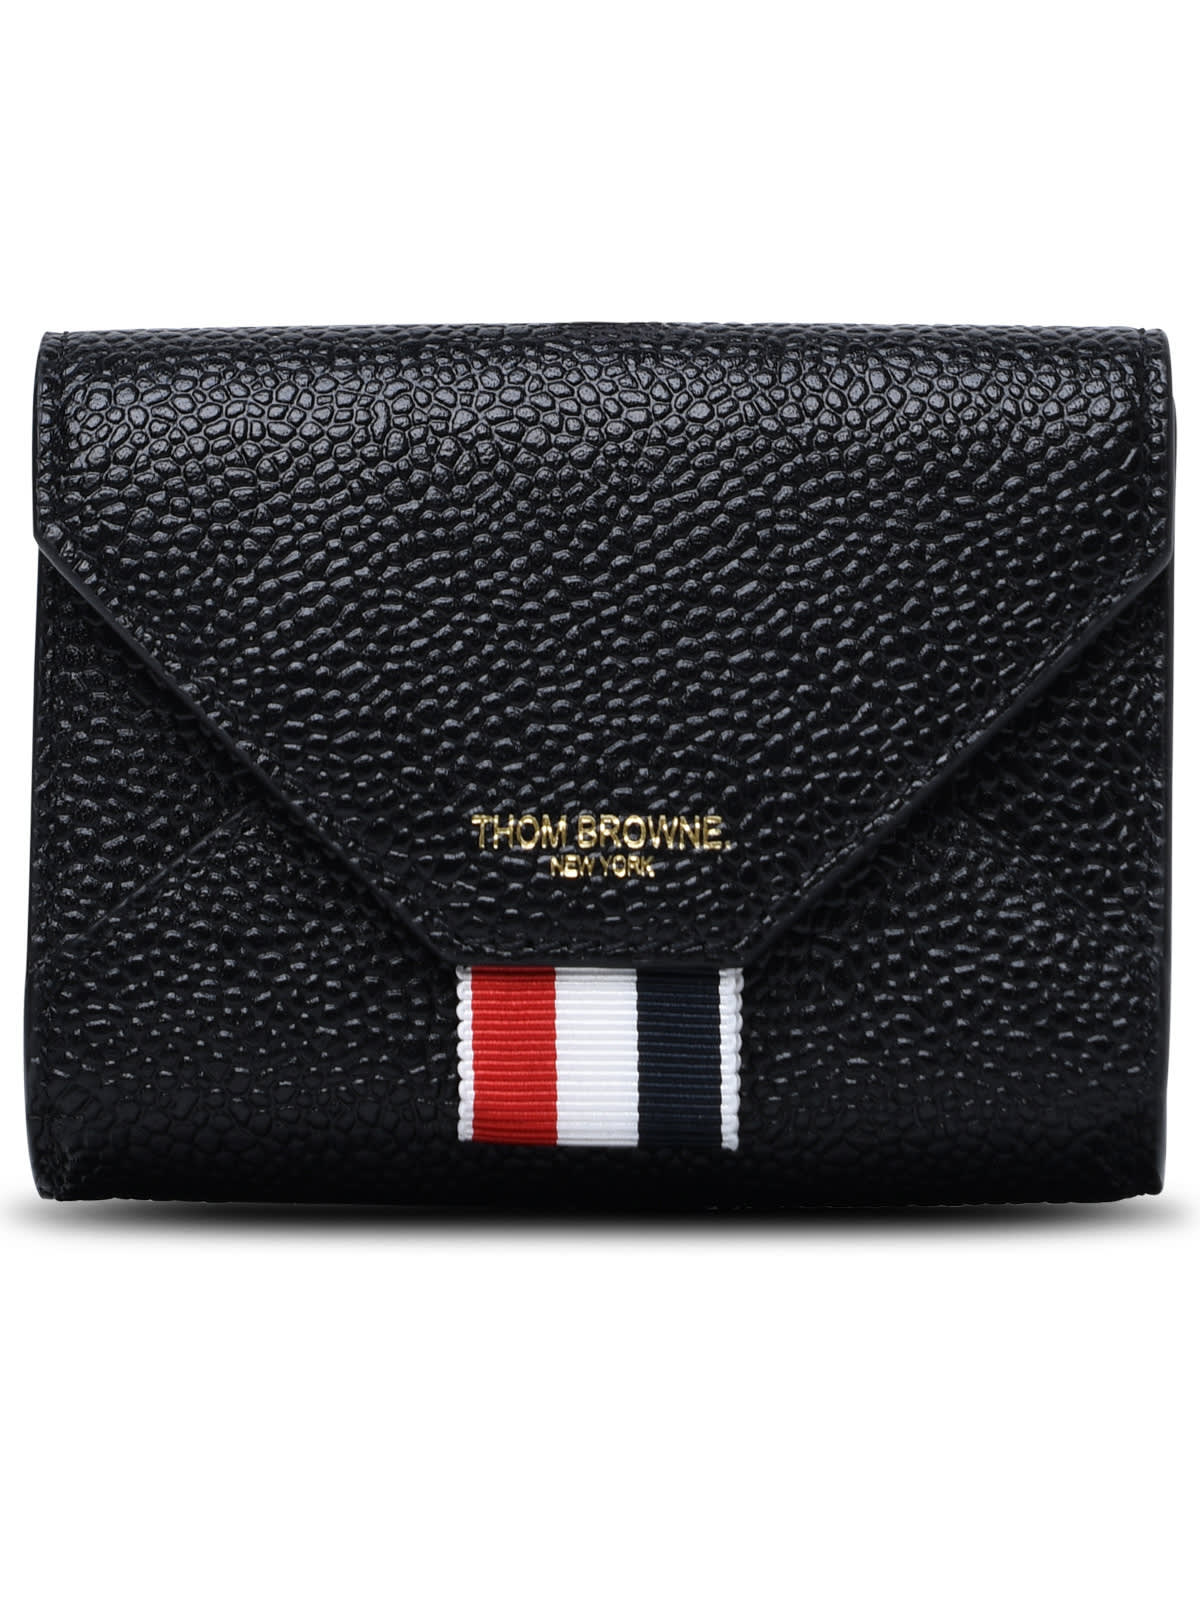 Black Grained Leather Purse